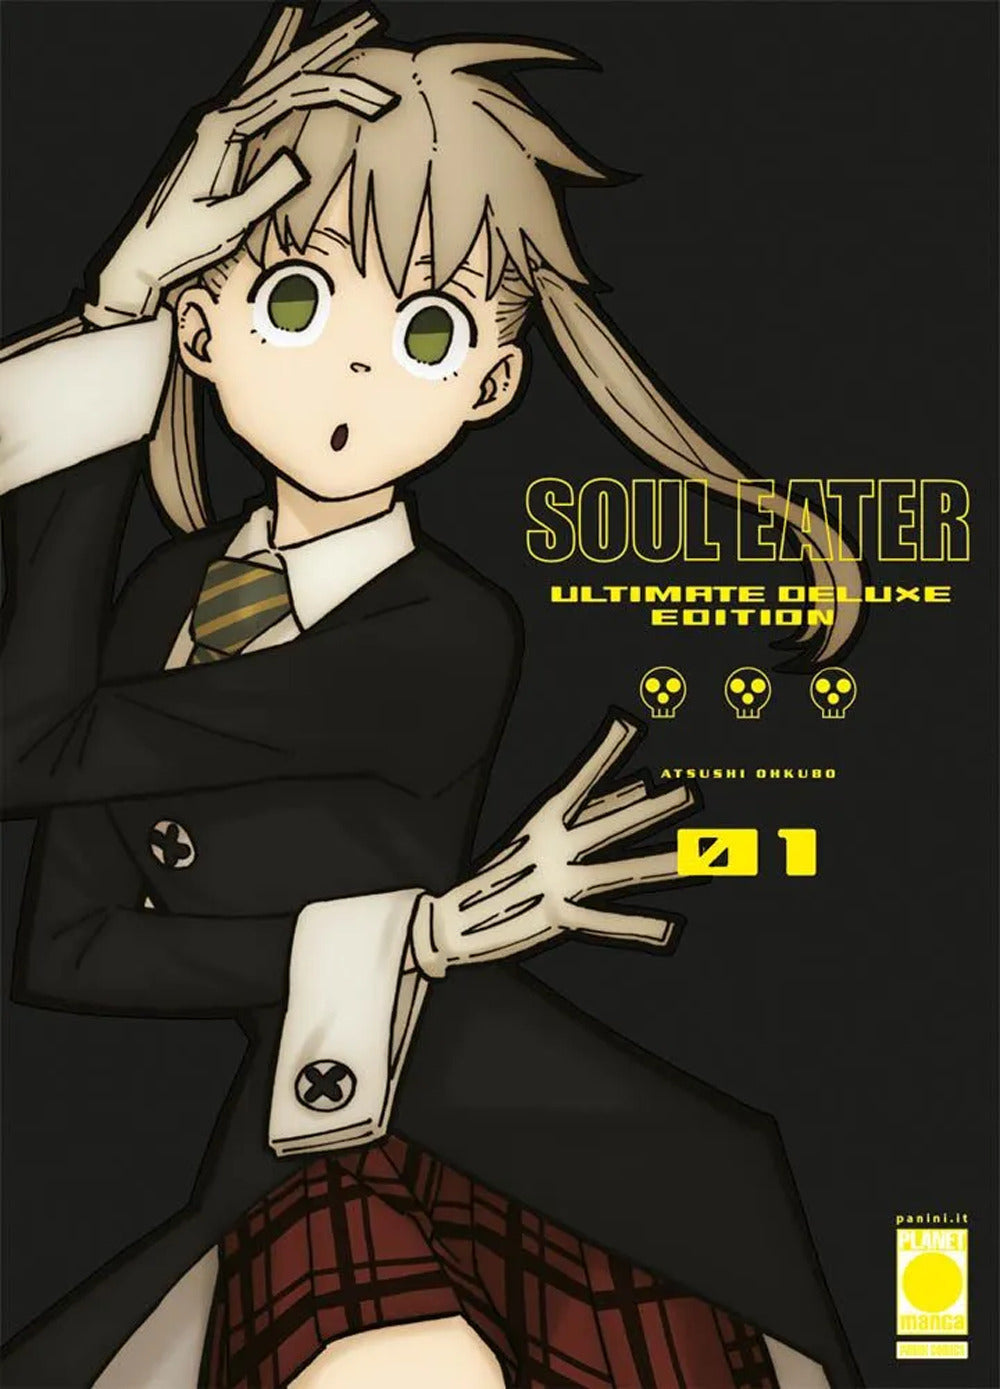 Soul eater. Ultimate deluxe edition. Vol. 1